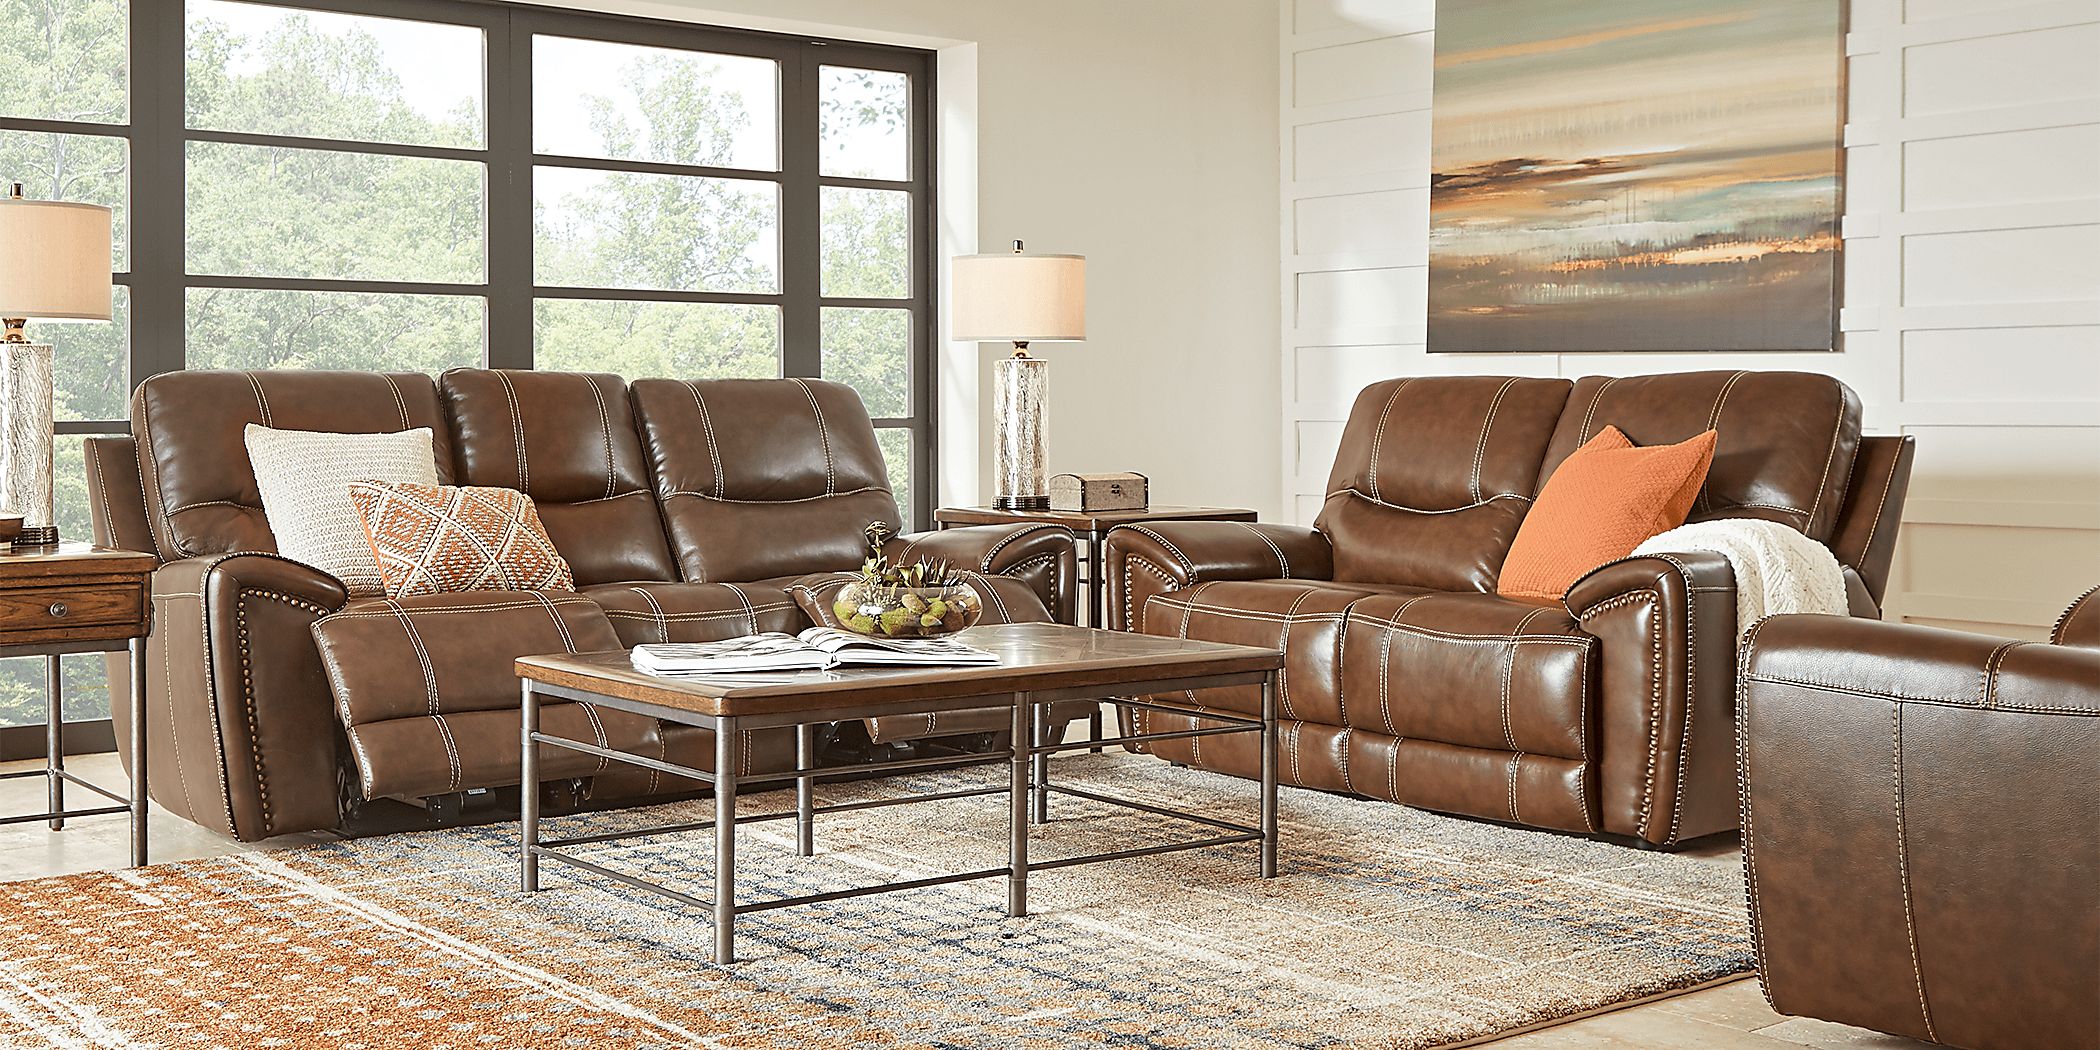 Italo 2 Pc Brown Leather Living Room